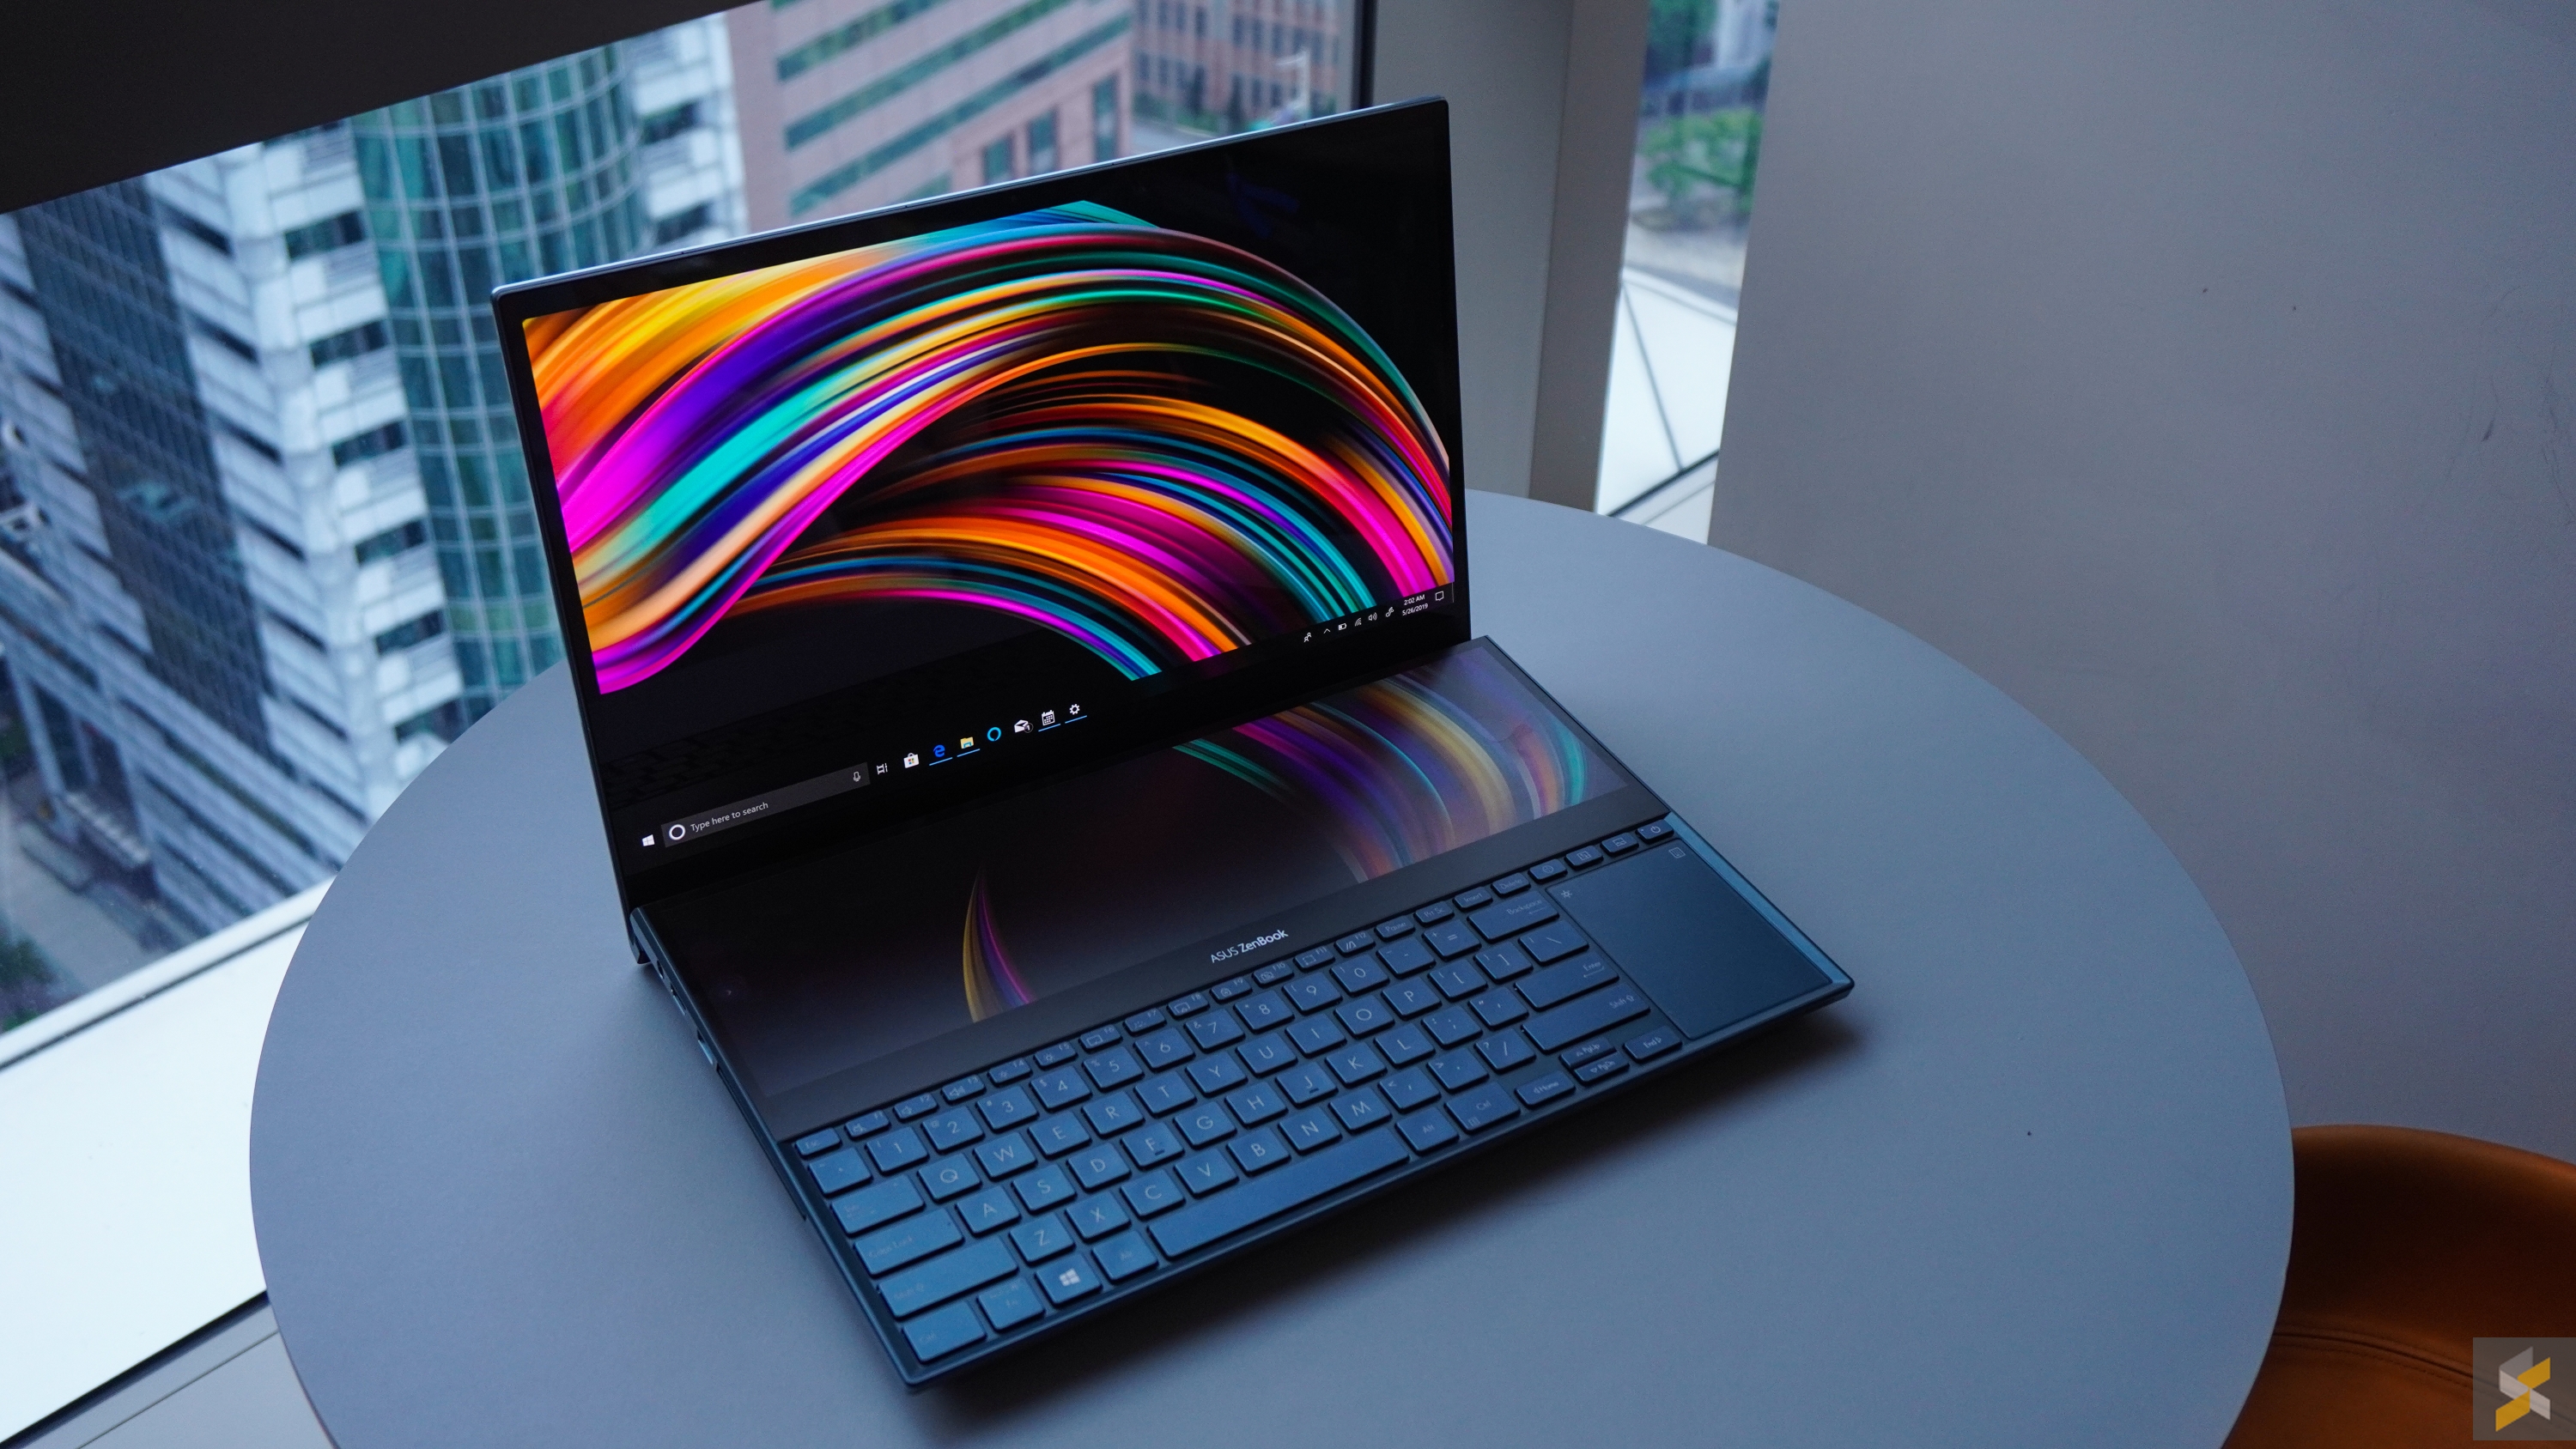 Asus ZenBook Pro Duo first impressions: So much potential, too much laptop